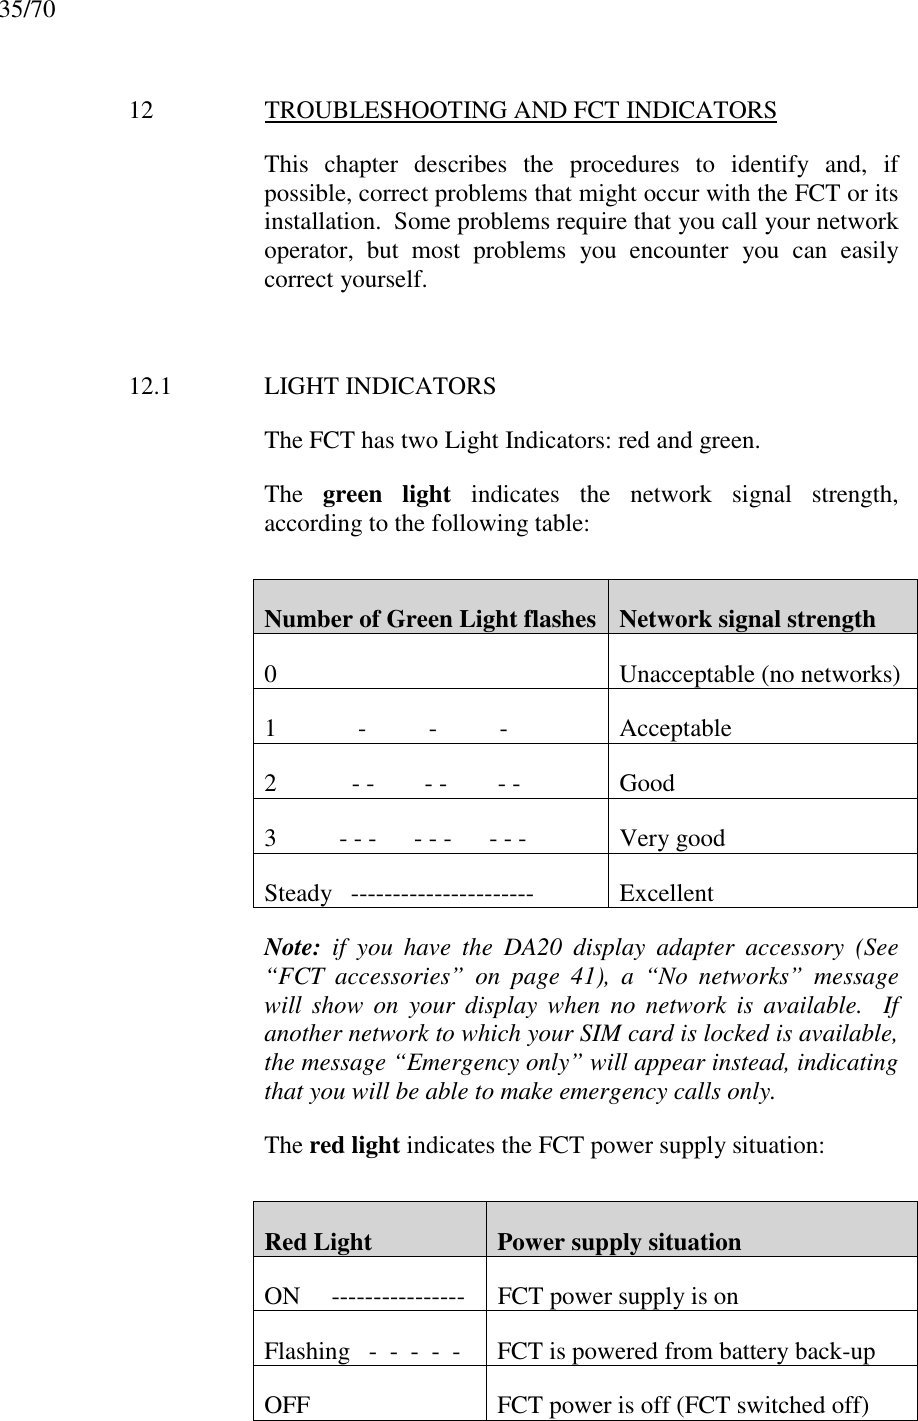 35/7012 TROUBLESHOOTING AND FCT INDICATORSThis chapter describes the procedures to identify and, ifpossible, correct problems that might occur with the FCT or itsinstallation.  Some problems require that you call your networkoperator, but most problems you encounter you can easilycorrect yourself.12.1 LIGHT INDICATORSThe FCT has two Light Indicators: red and green.The  green light indicates the network signal strength,according to the following table:Number of Green Light flashes Network signal strength0 Unacceptable (no networks)1             -          -          - Acceptable2            - -        - -        - - Good3          - - -      - - -      - - - Very goodSteady   ---------------------- ExcellentNote: if you have the DA20 display adapter accessory (See“FCT accessories” on page 41), a “No networks” messagewill show on your display when no network is available.  Ifanother network to which your SIM card is locked is available,the message “Emergency only” will appear instead, indicatingthat you will be able to make emergency calls only.The red light indicates the FCT power supply situation:Red Light Power supply situationON     ---------------- FCT power supply is onFlashing   -  -  -  -  - FCT is powered from battery back-upOFF FCT power is off (FCT switched off)